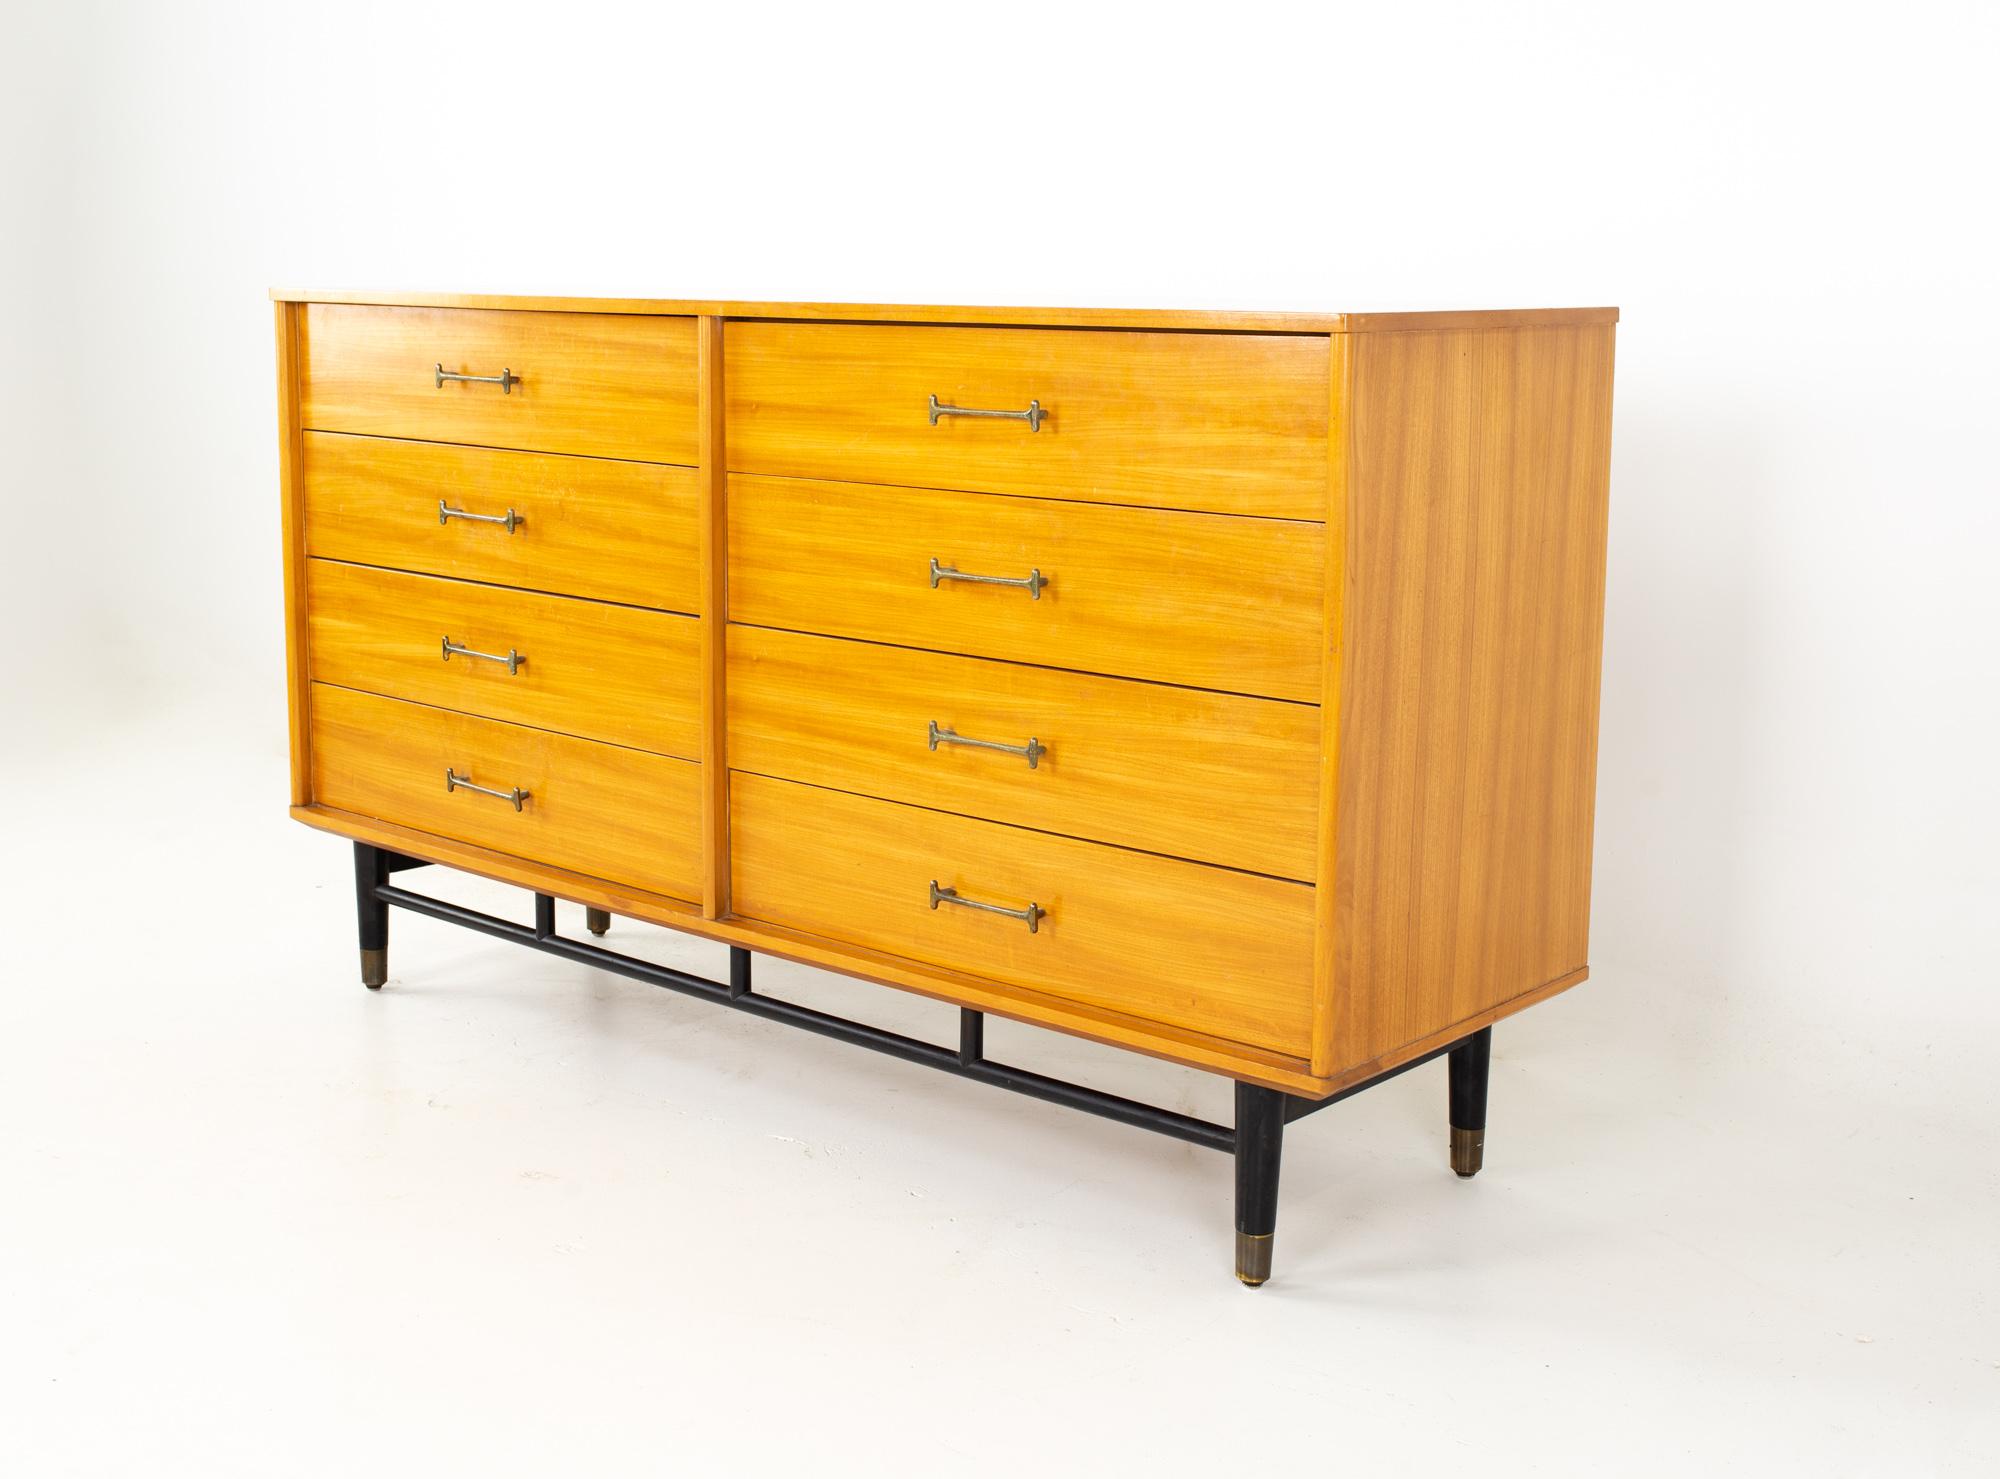 Milo Baughman for Drexel new todays living midcentury 8 drawer lowboy dresser
Dresser measures: 60.25 wide x 18.25 deep x 34 inches high

All pieces of furniture can be had in what we call restored vintage condition. That means the piece is